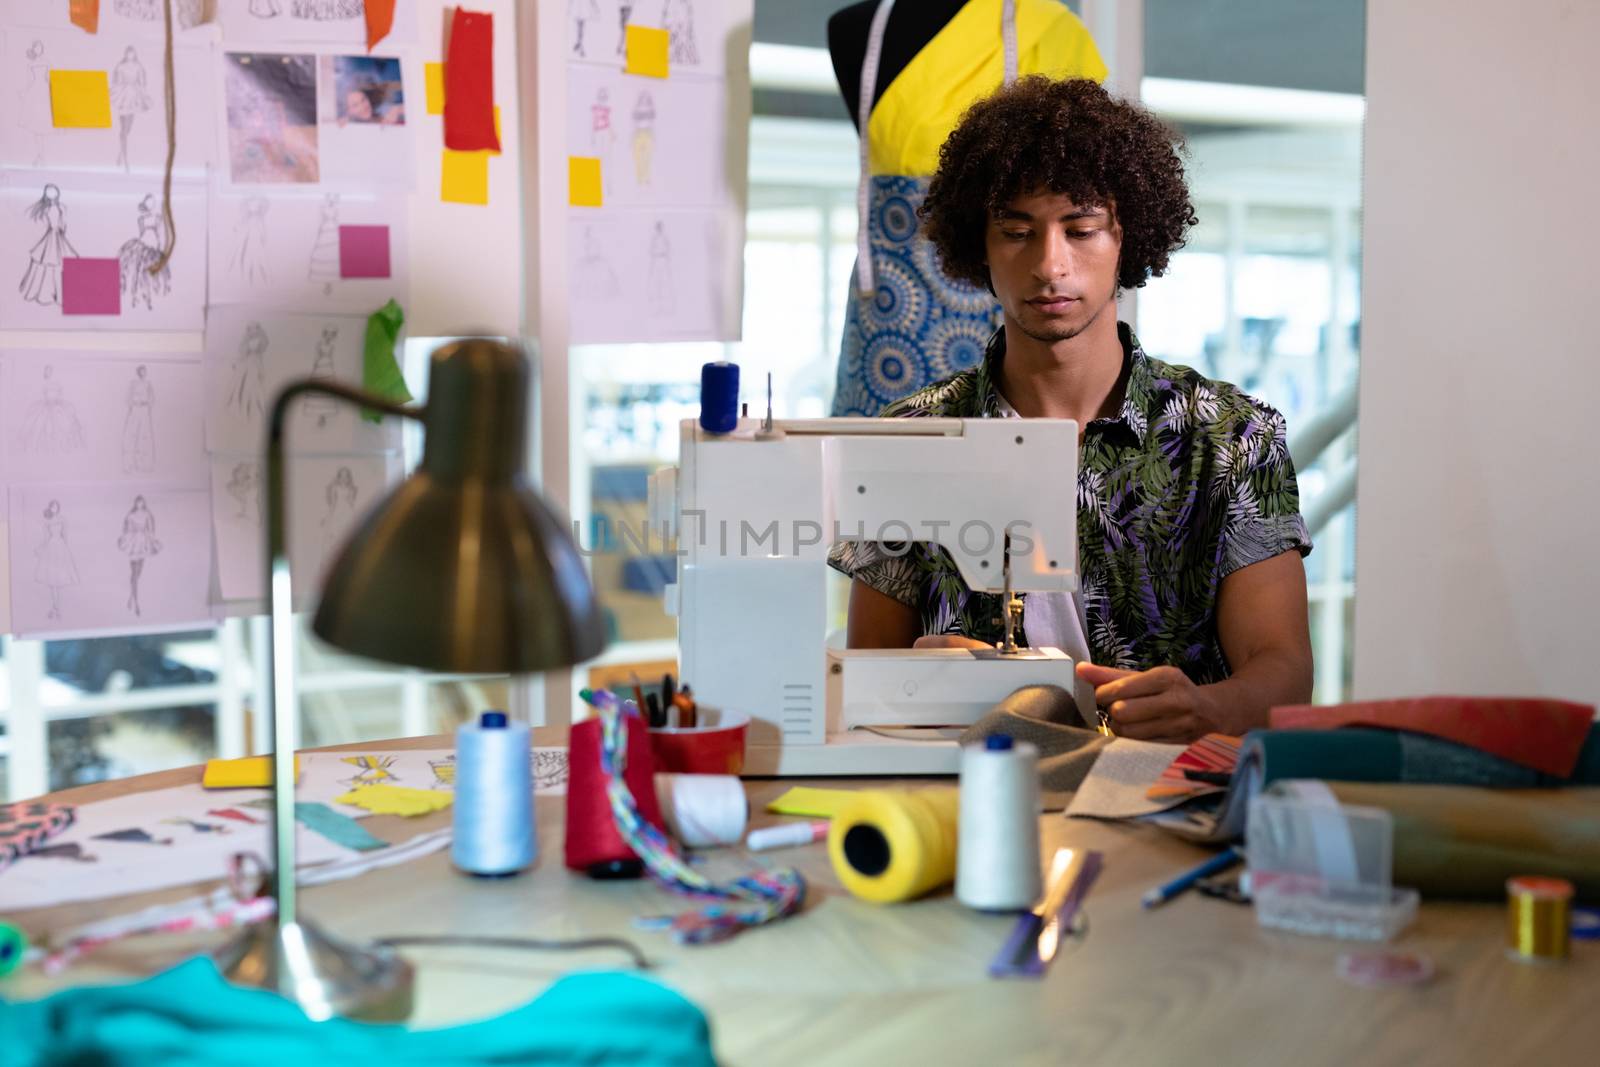 Front view of young mixed race male fashion designer using sewing machine on a table in design studio. This is a casual creative start-up business office for a diverse team